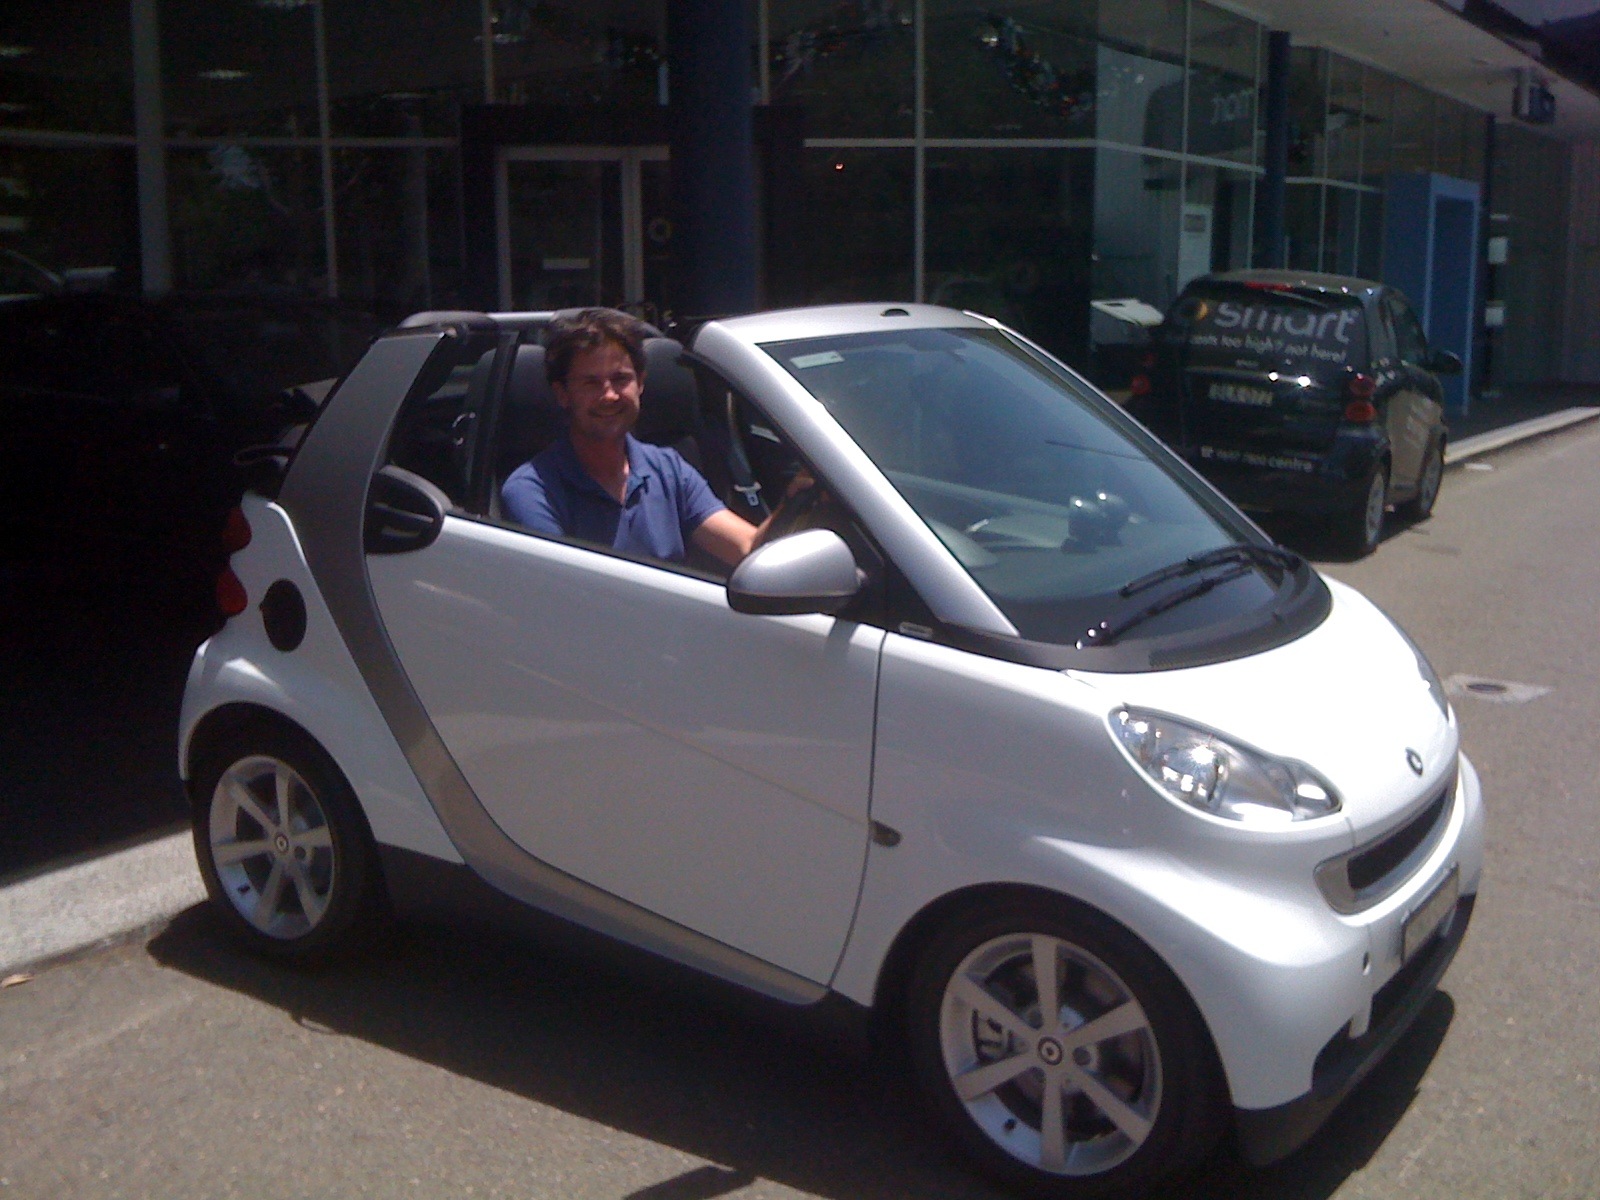 SMART Car ForTwo EV update - A Sustainable Choice